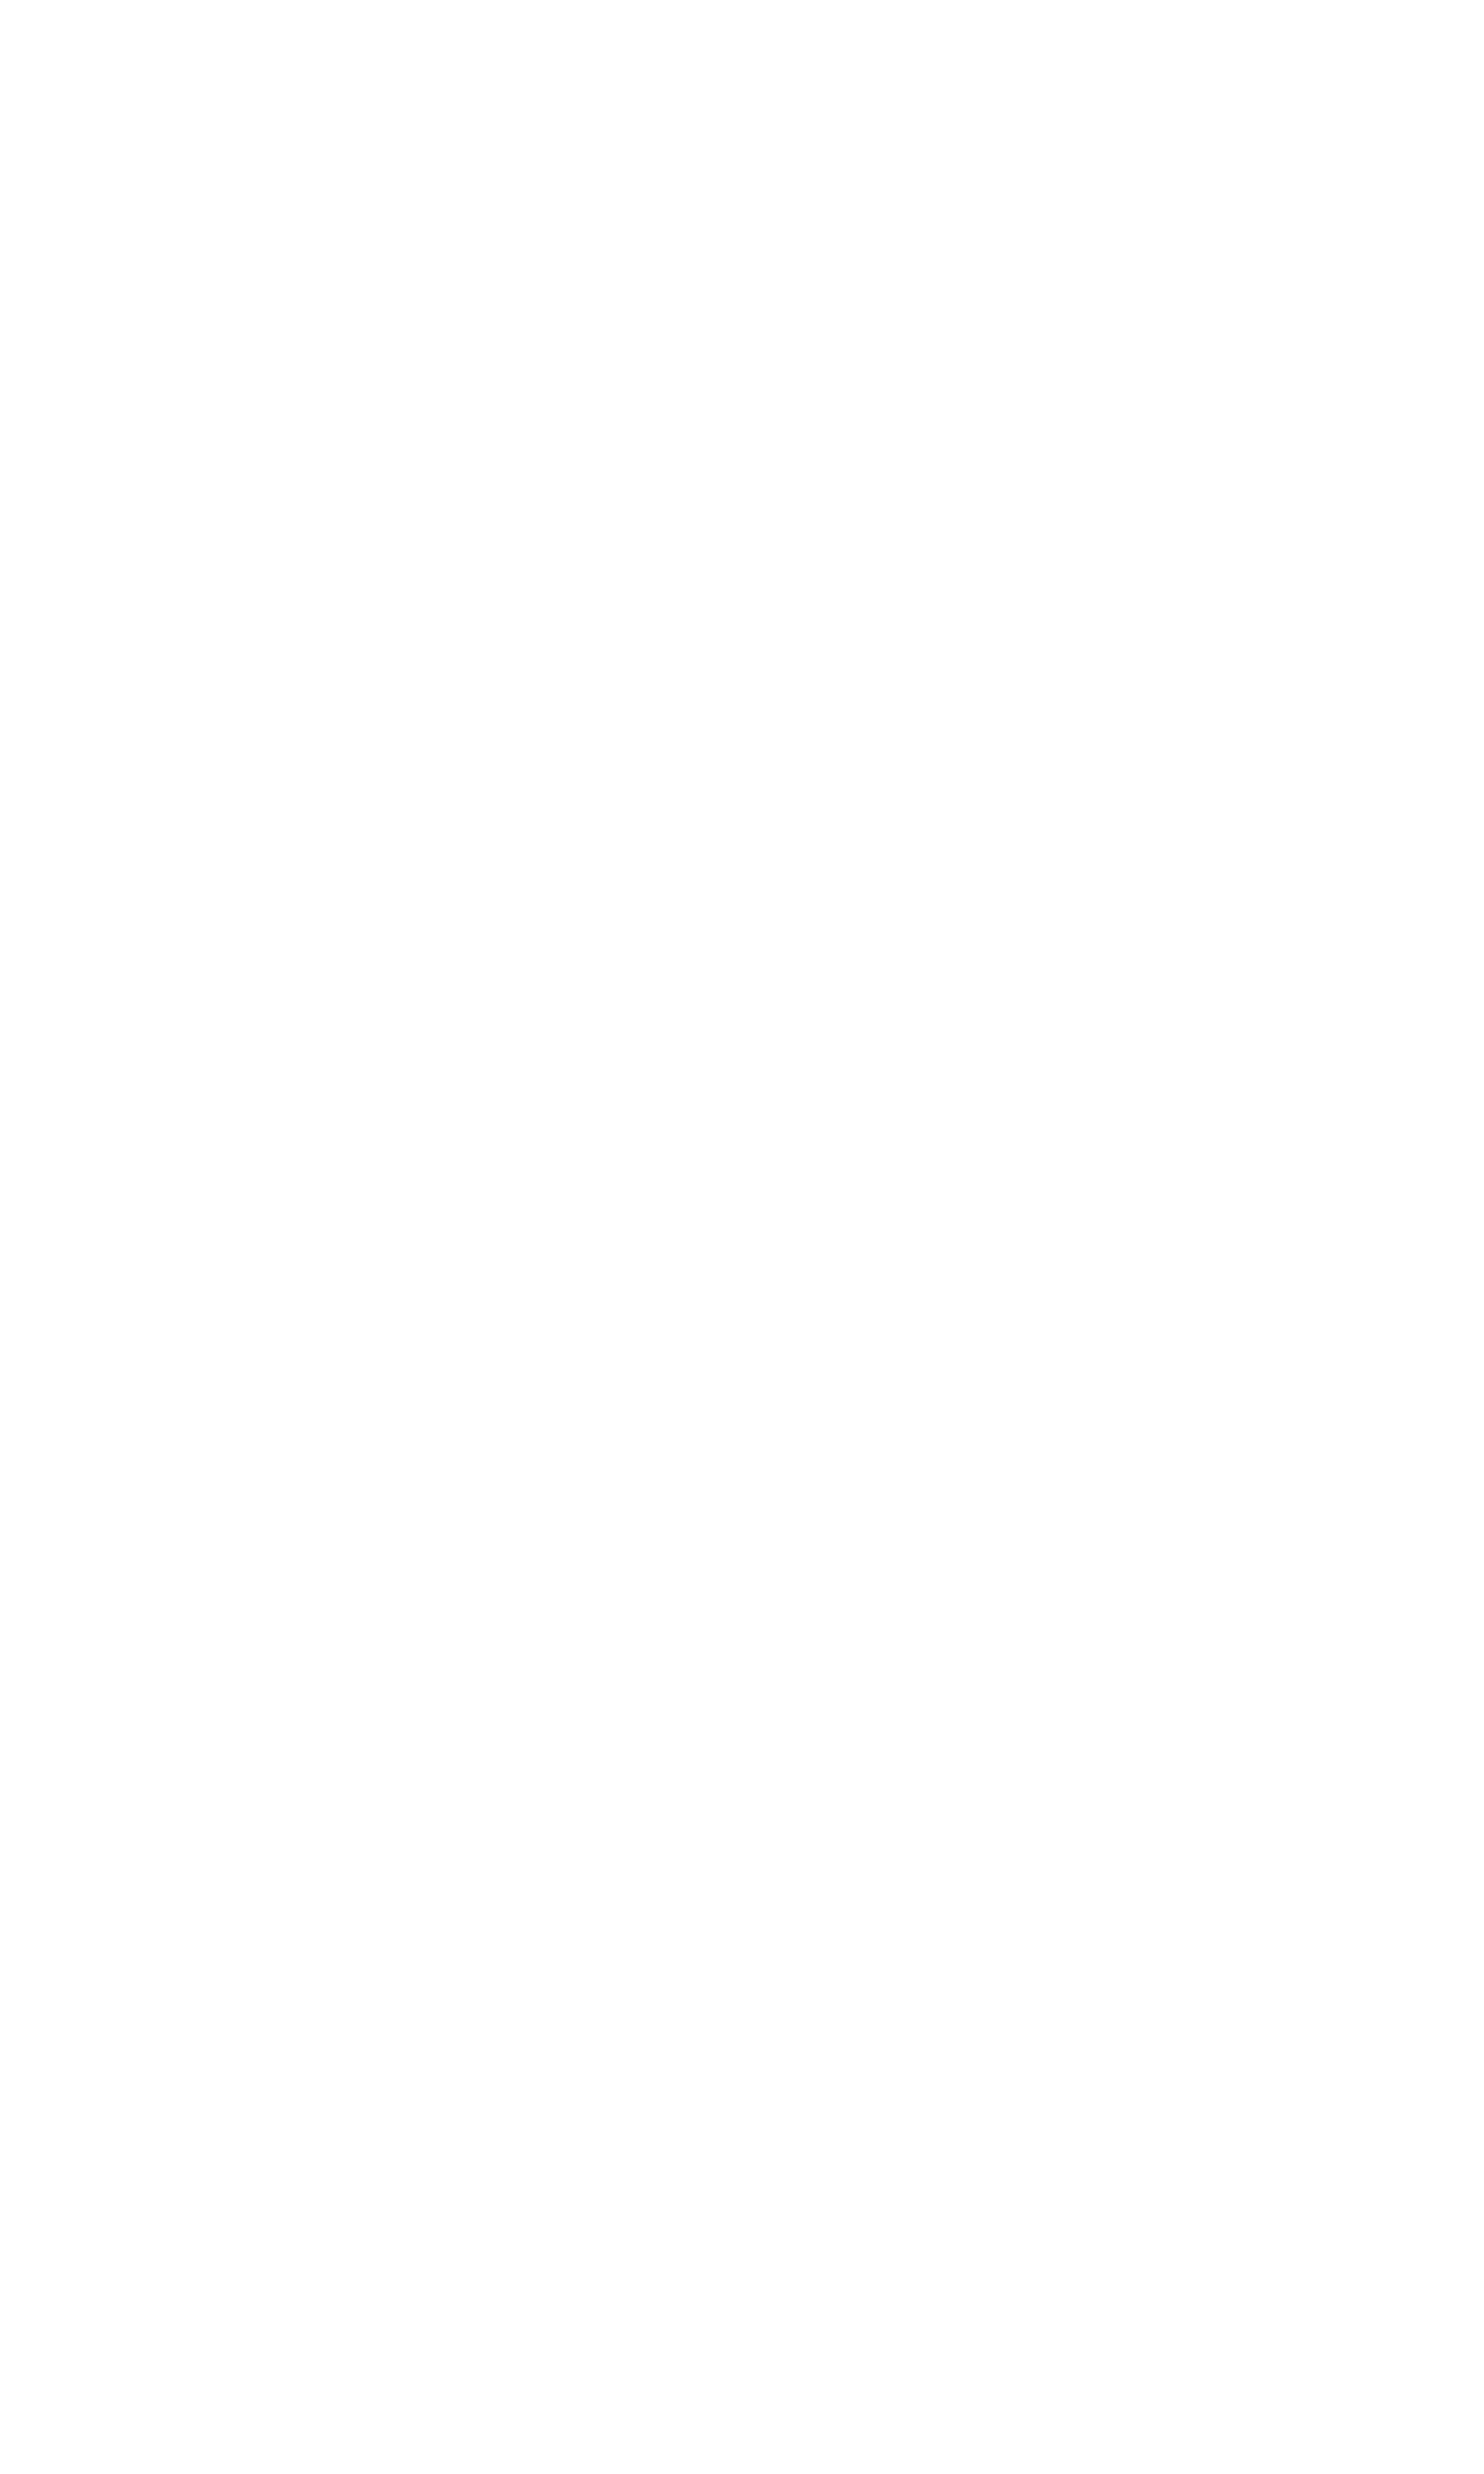 Evans Feed Co.